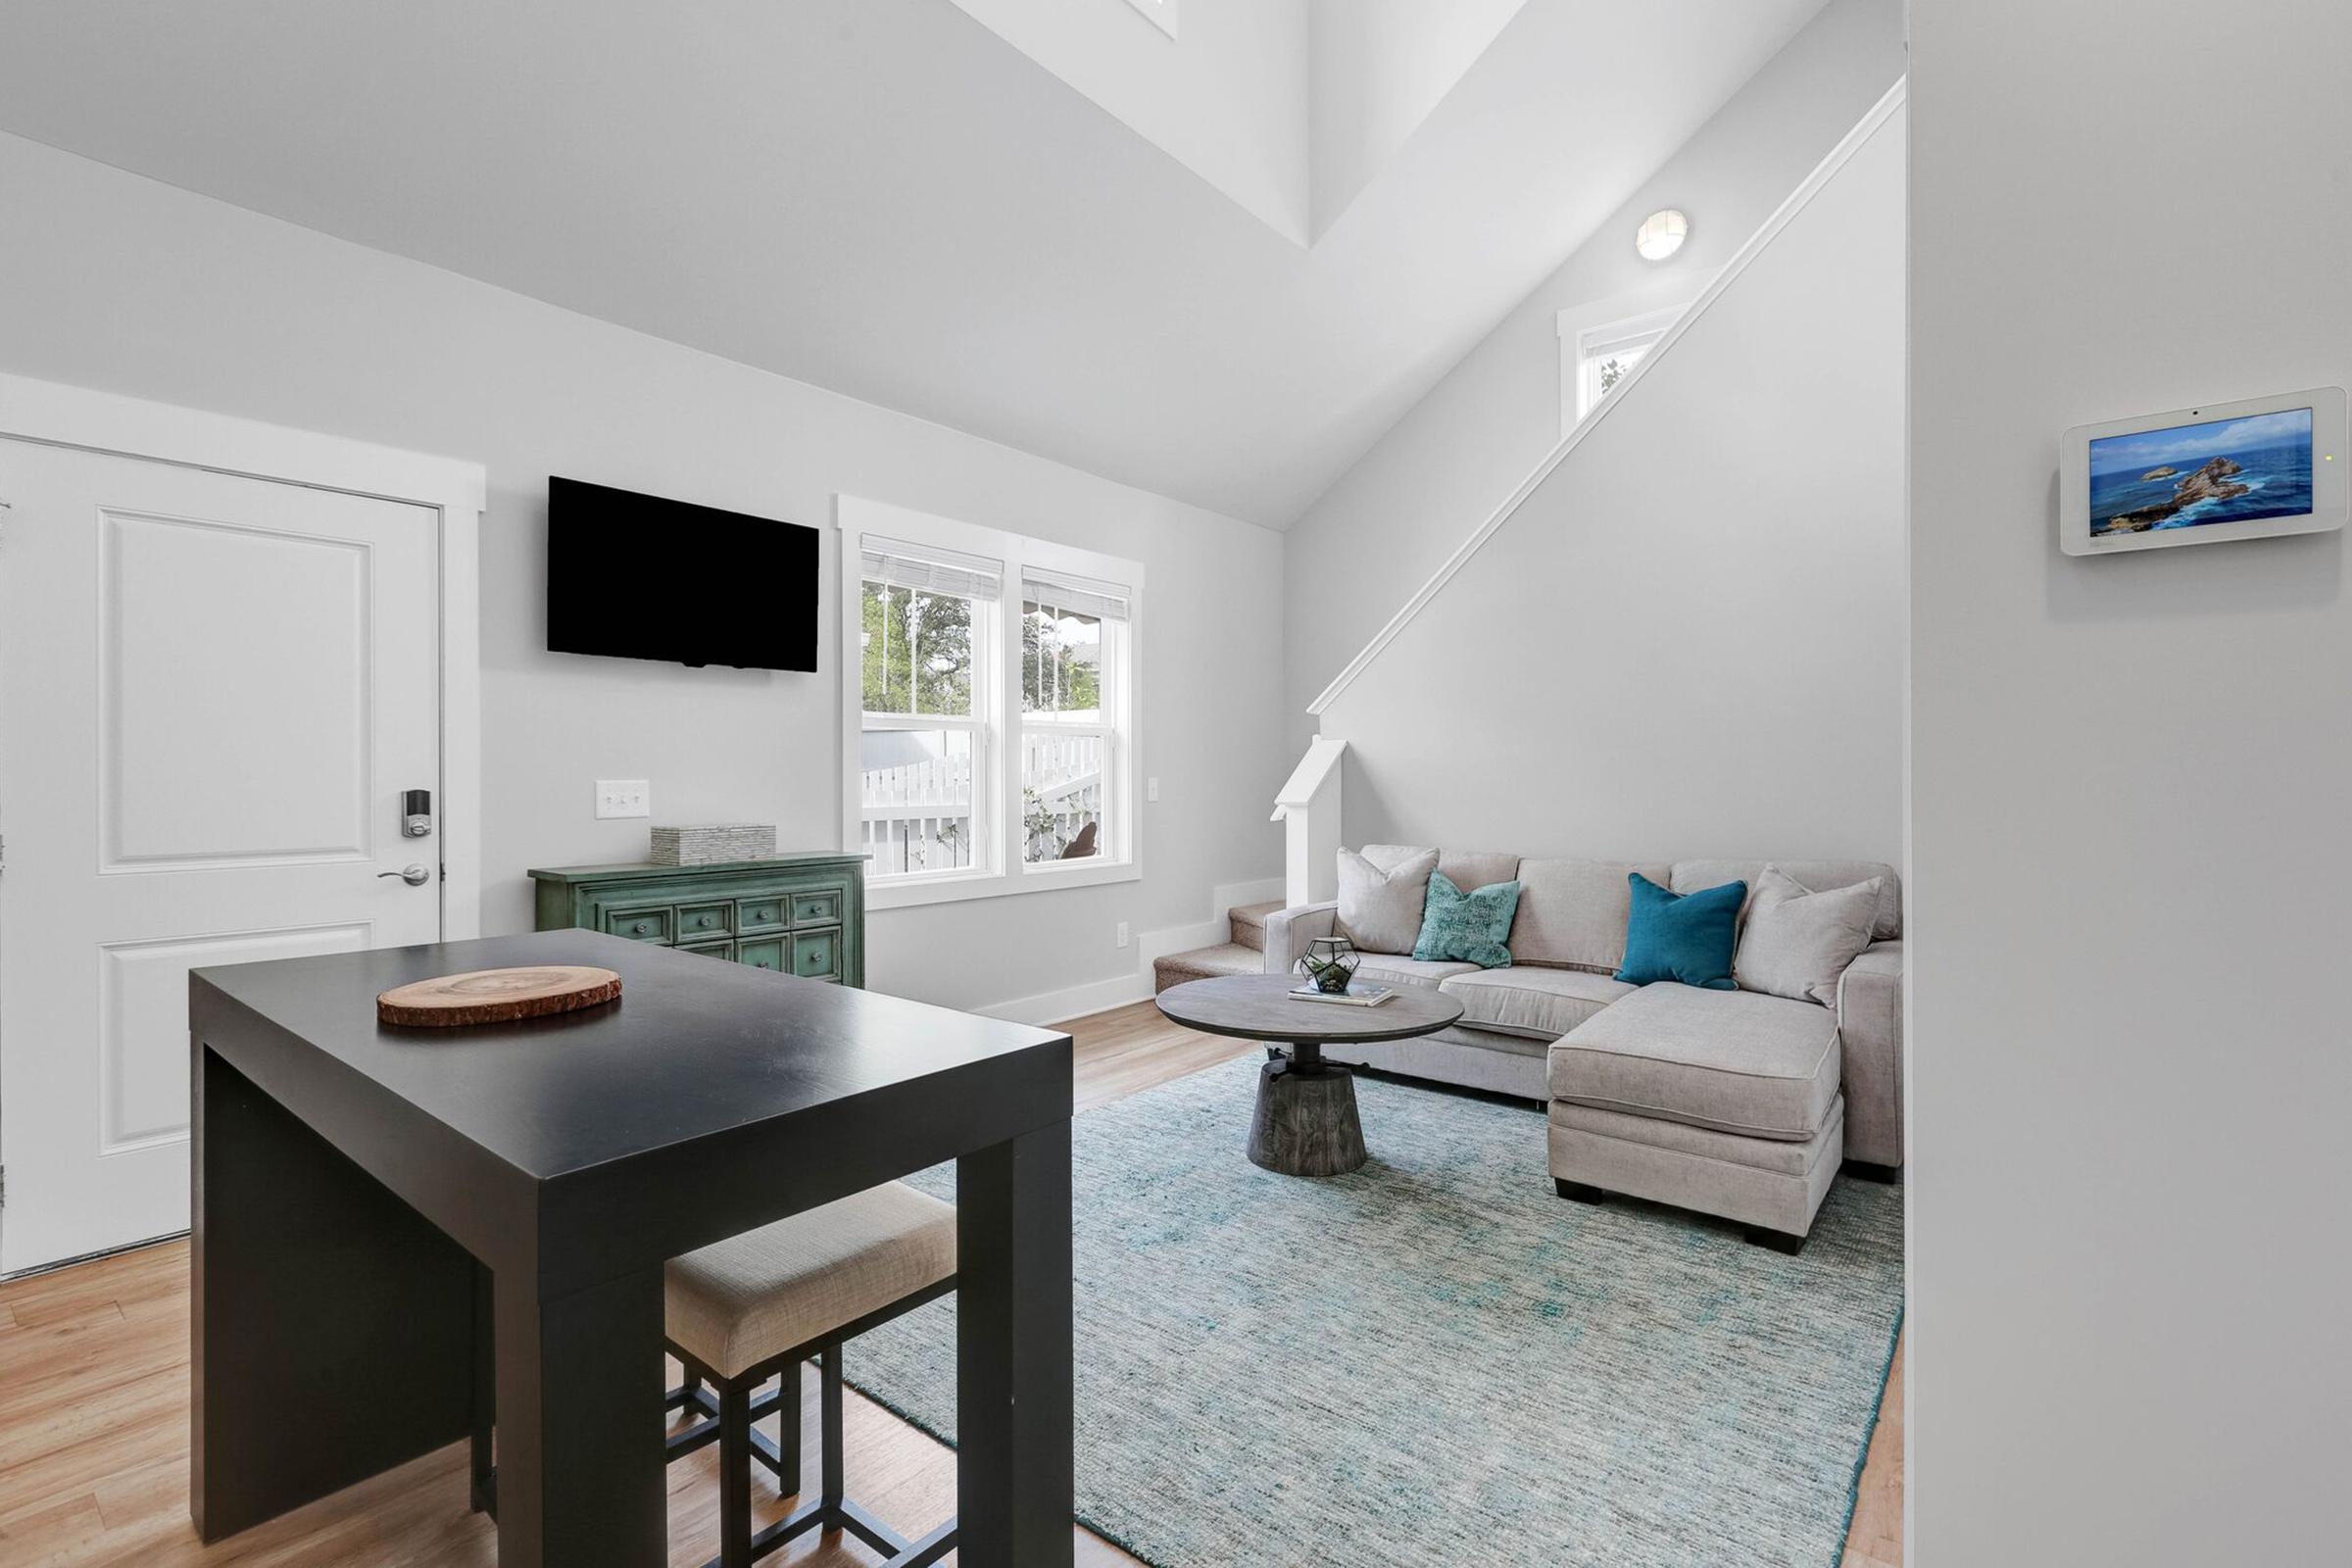 High ceilings with natural lighting at The Townhomes at Beau Rivage in Wilmington, North Carolina.